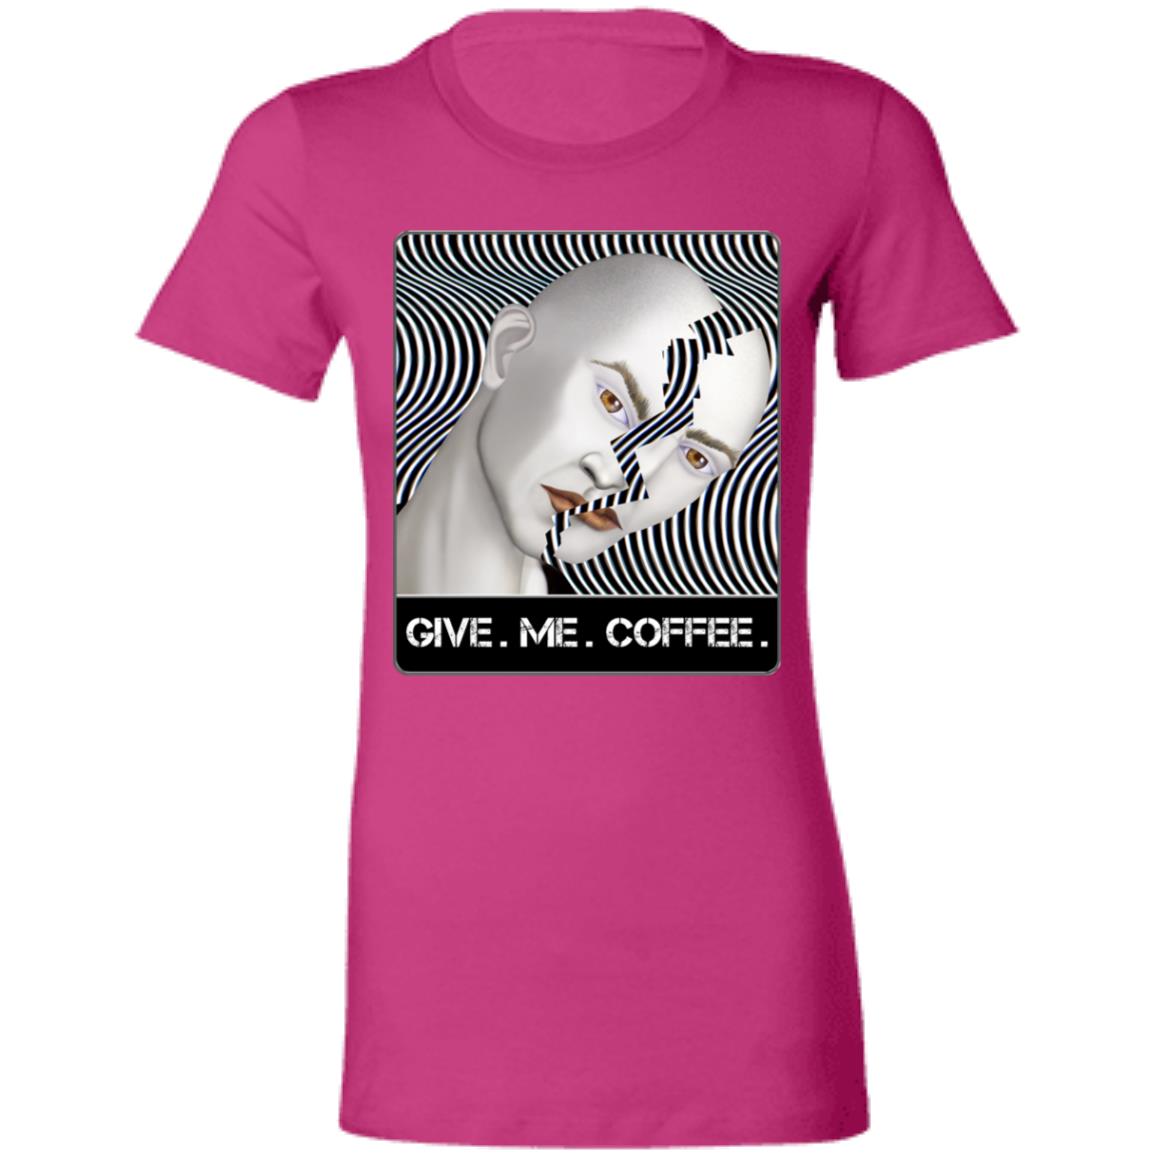 GIVE. ME. COFFEE.  -Women's Fitted T-Shirt